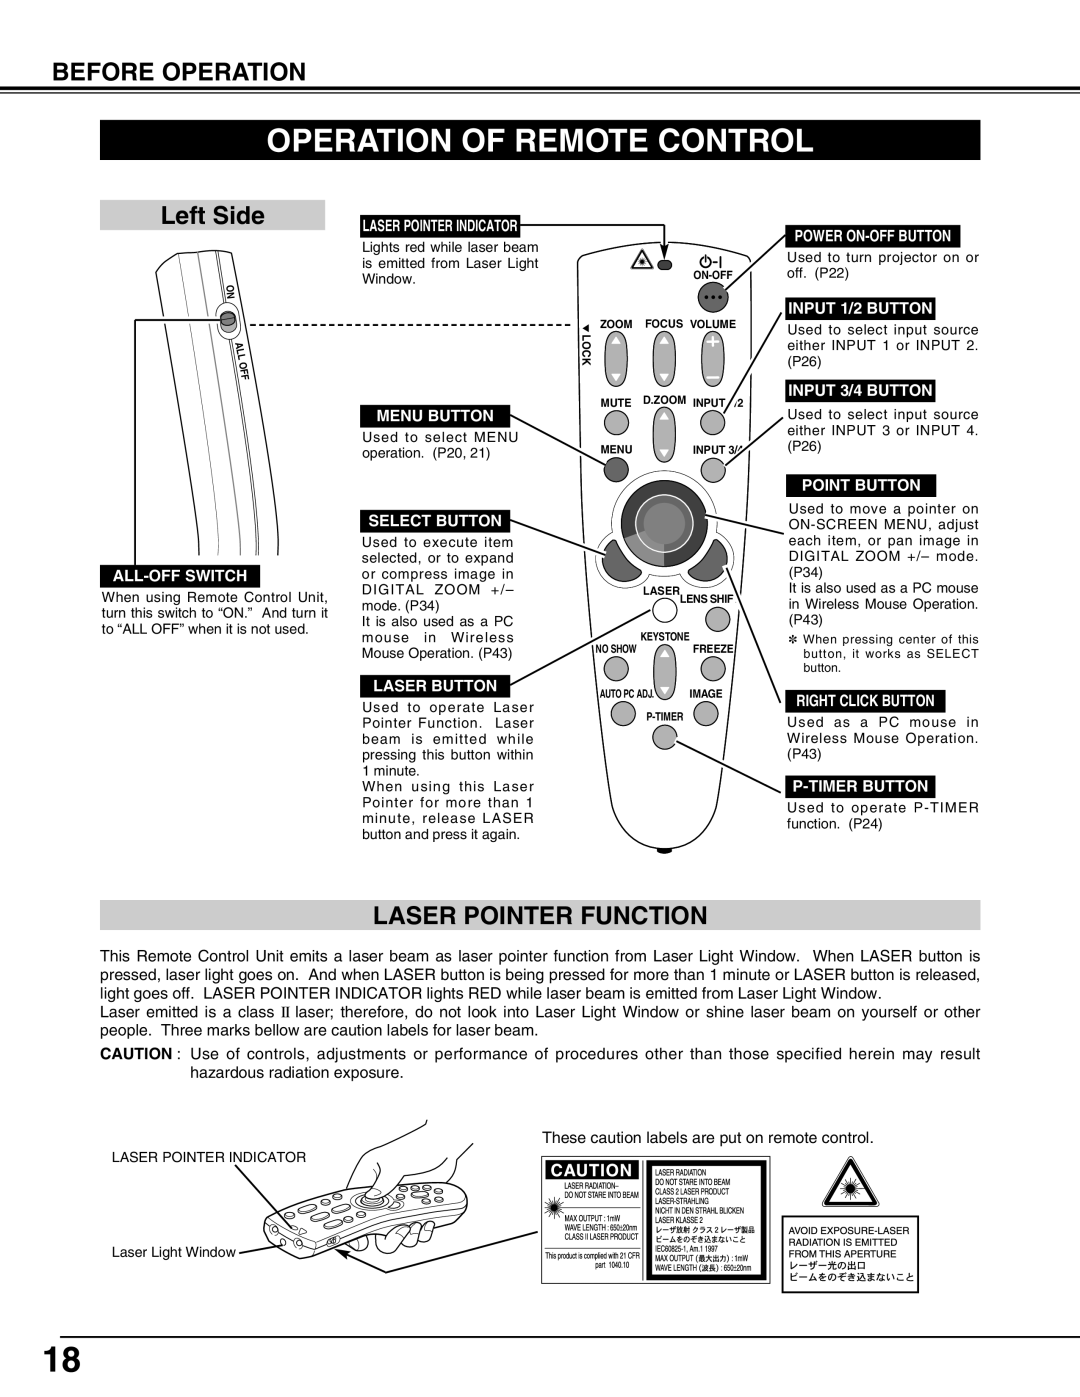 Eiki LC-UXT3 instruction manual Operation Of Remote Control, Left Side, Laser Pointer Function, Before Operation 